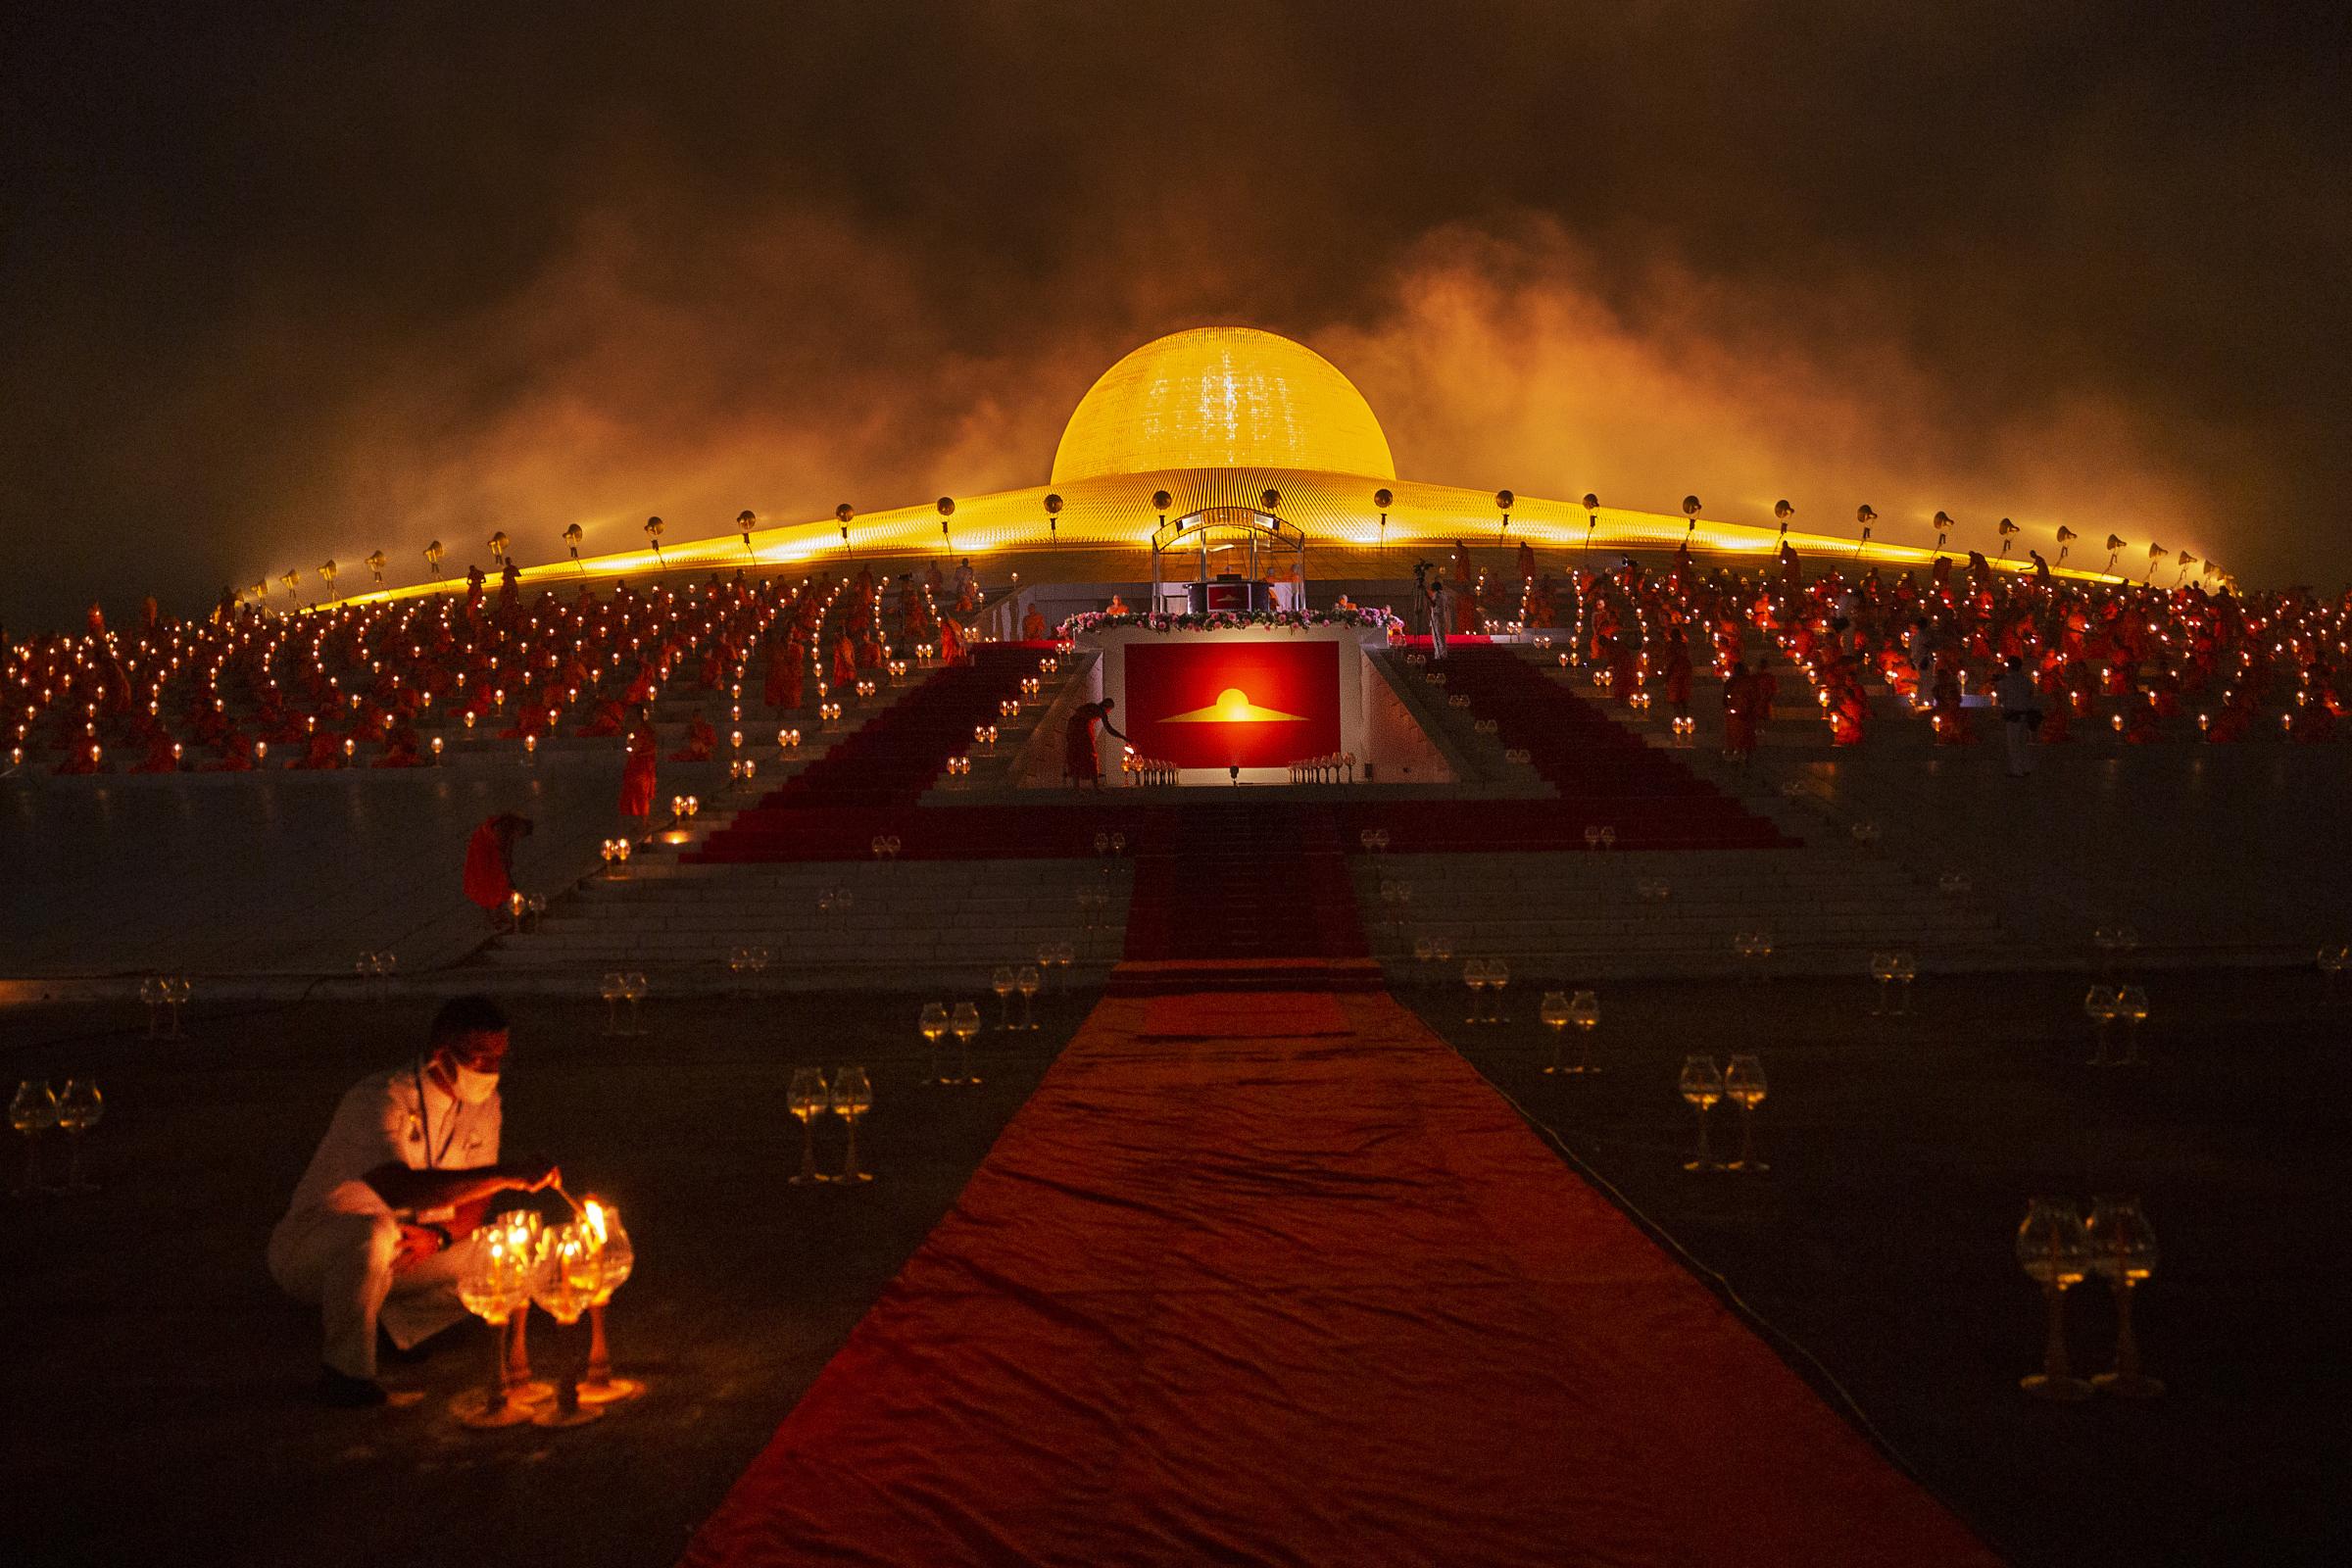 Singles - One-thousand monks pray after lighting one-hundred...